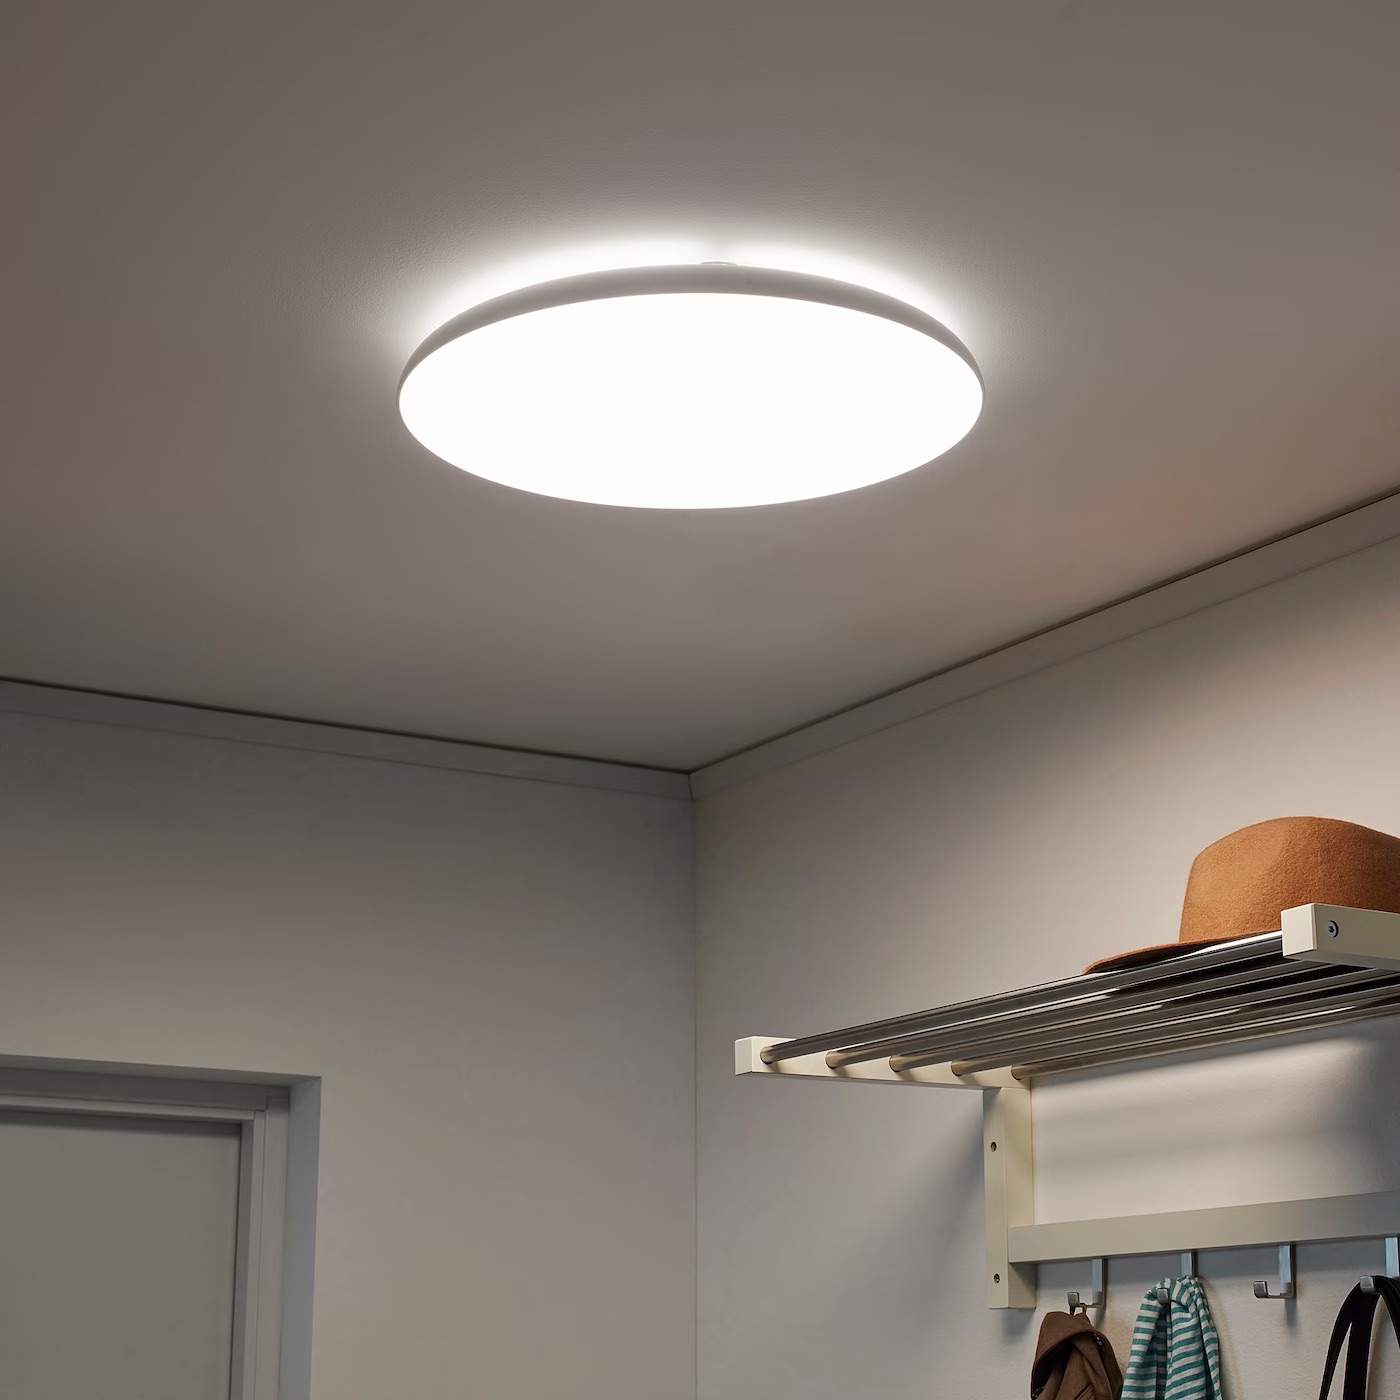 How Much Does It Cost To Install A Ceiling Light